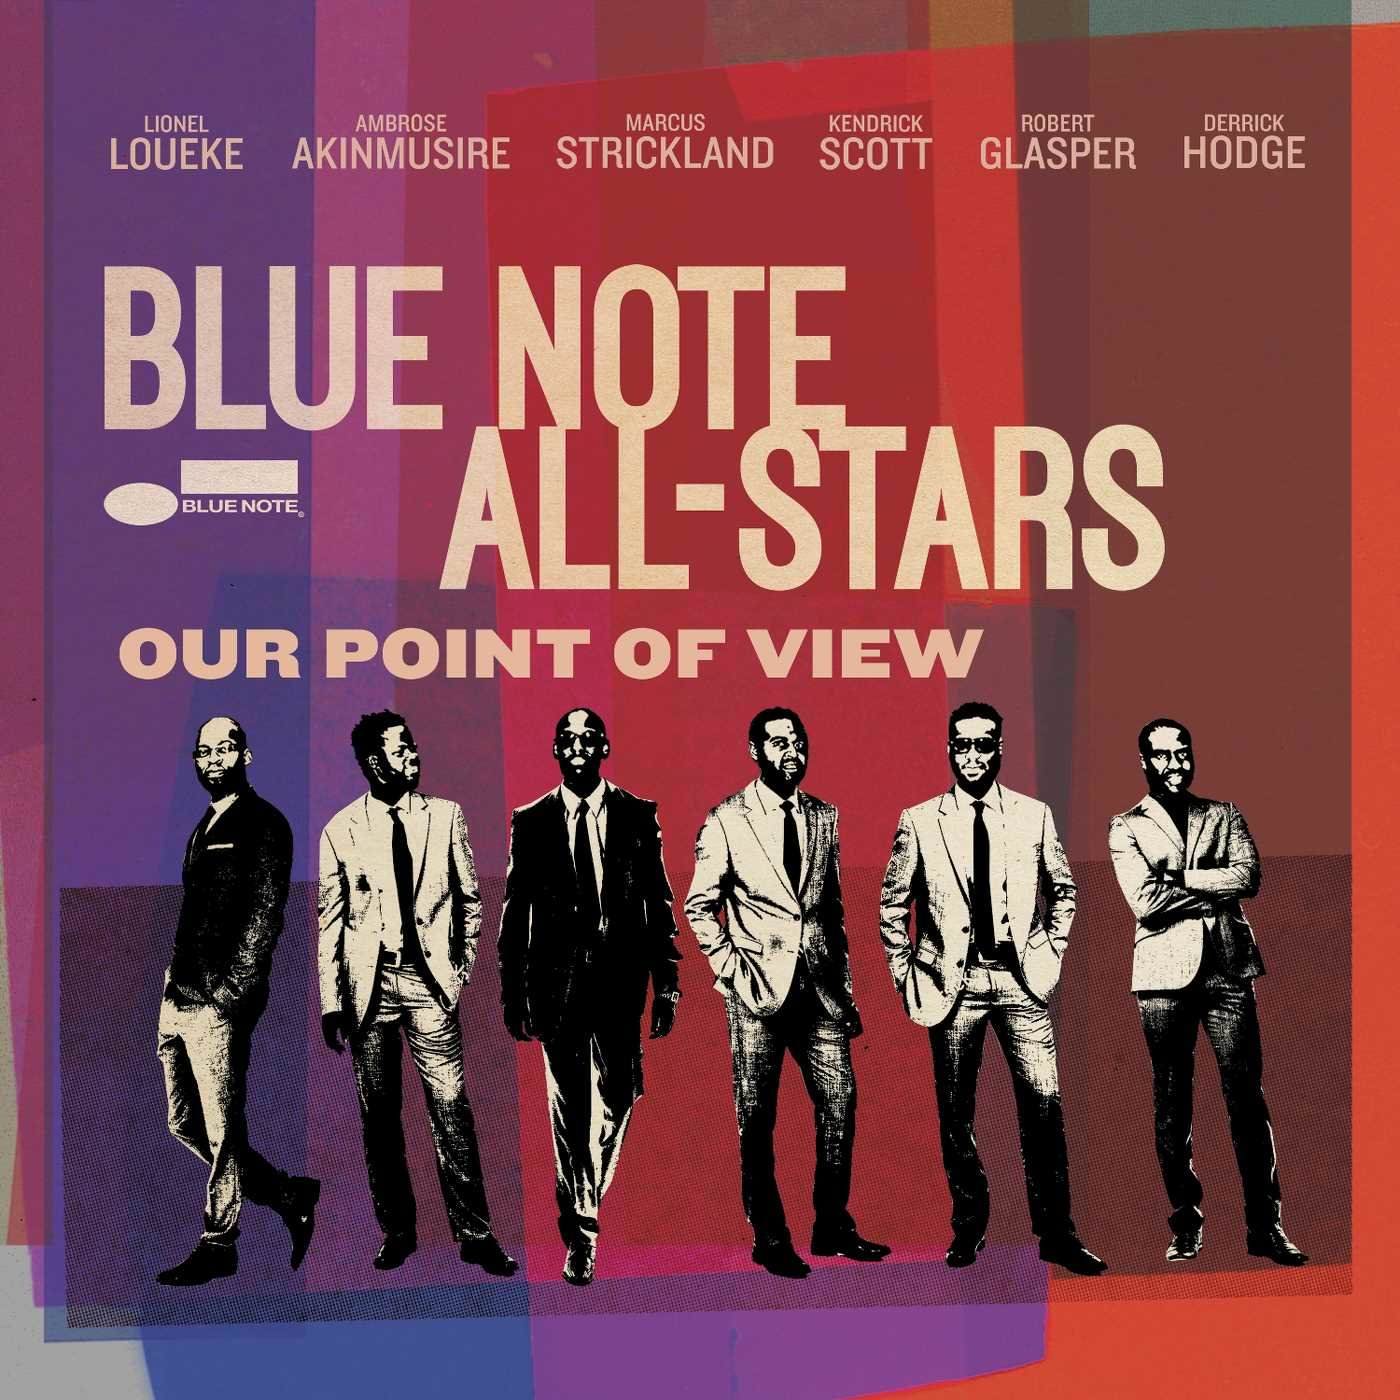 Blue Note All-Stars - Our Point of View (2017) [FLAC 24bit/96kHz]